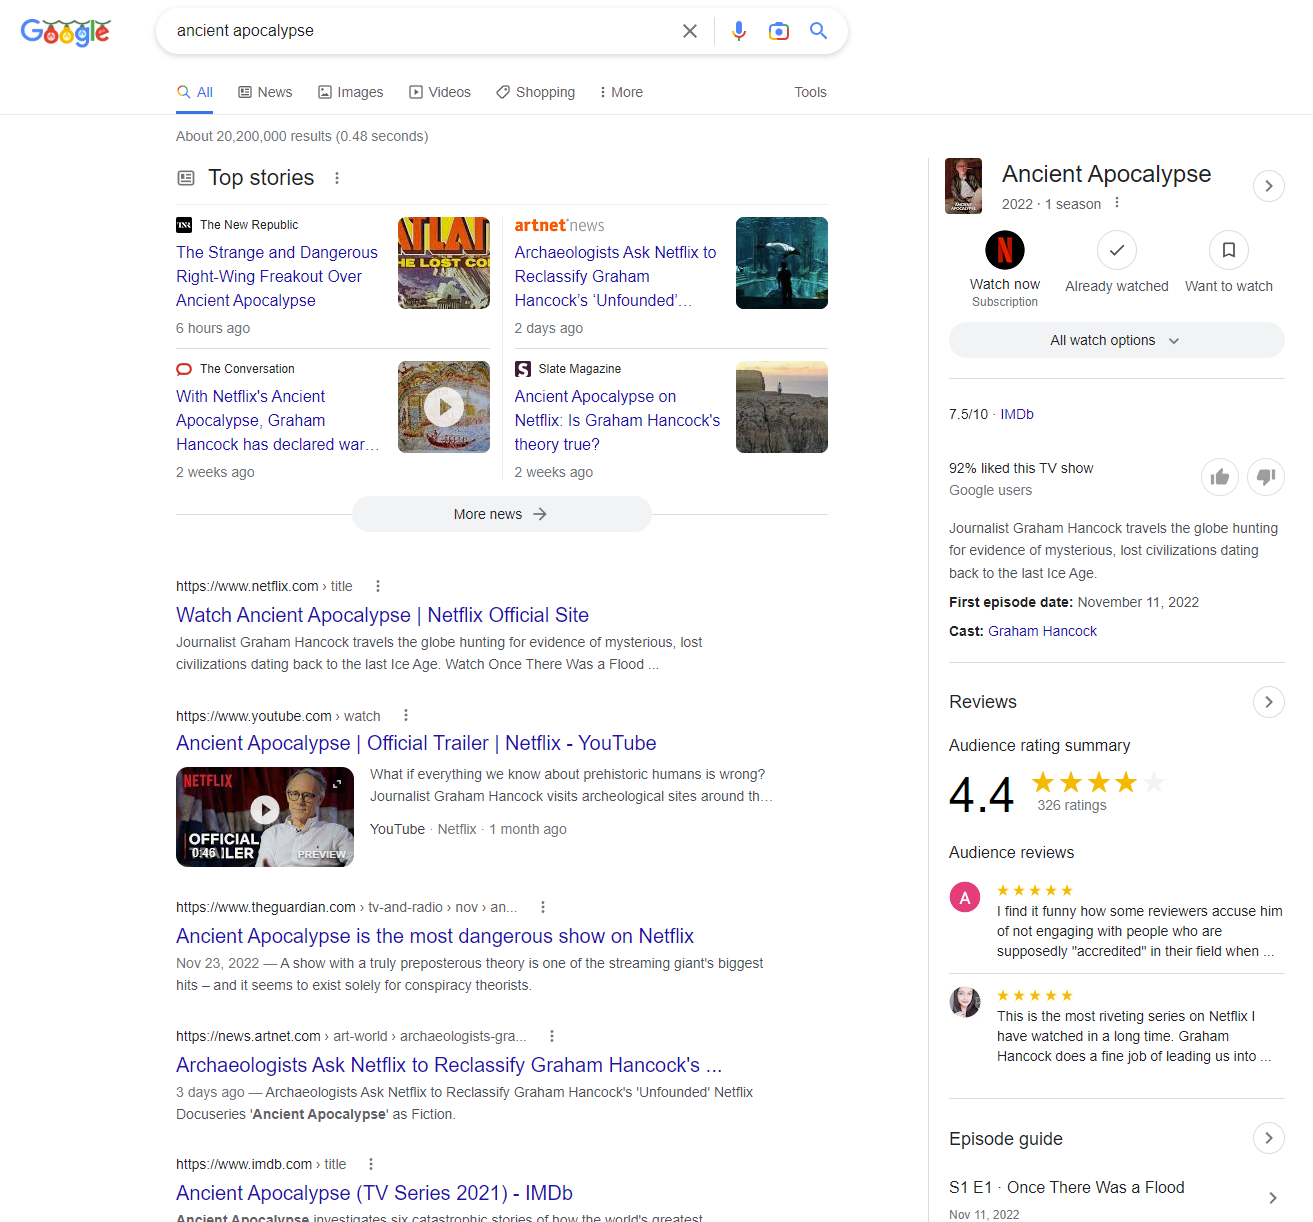 Screenshot of Google search results for [ancient apocalypse]